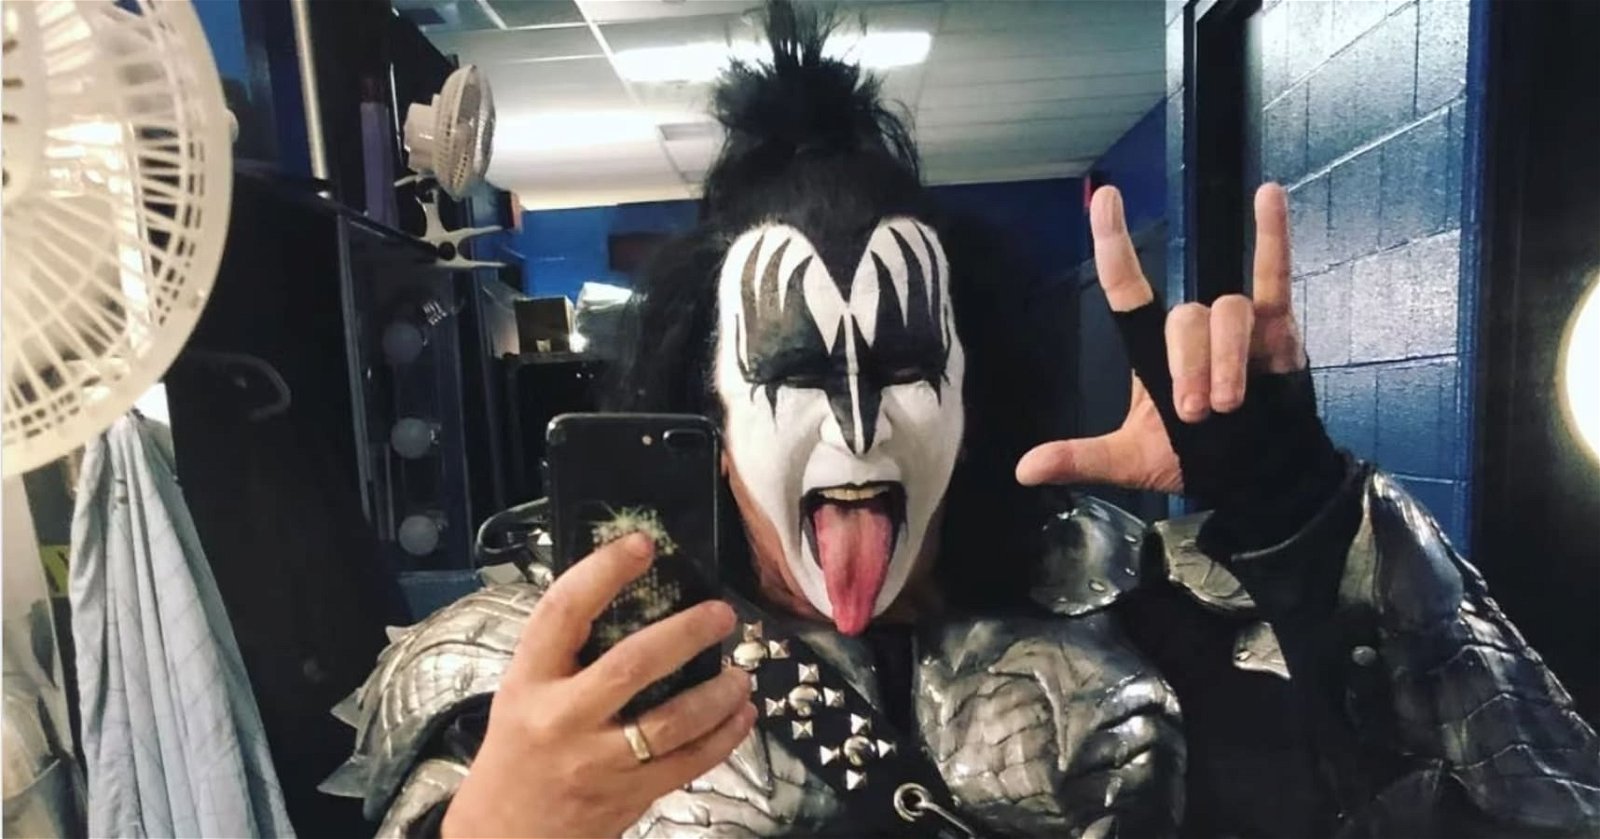 The Top 9 Songs That Gene Simmons Picked As His Favorites